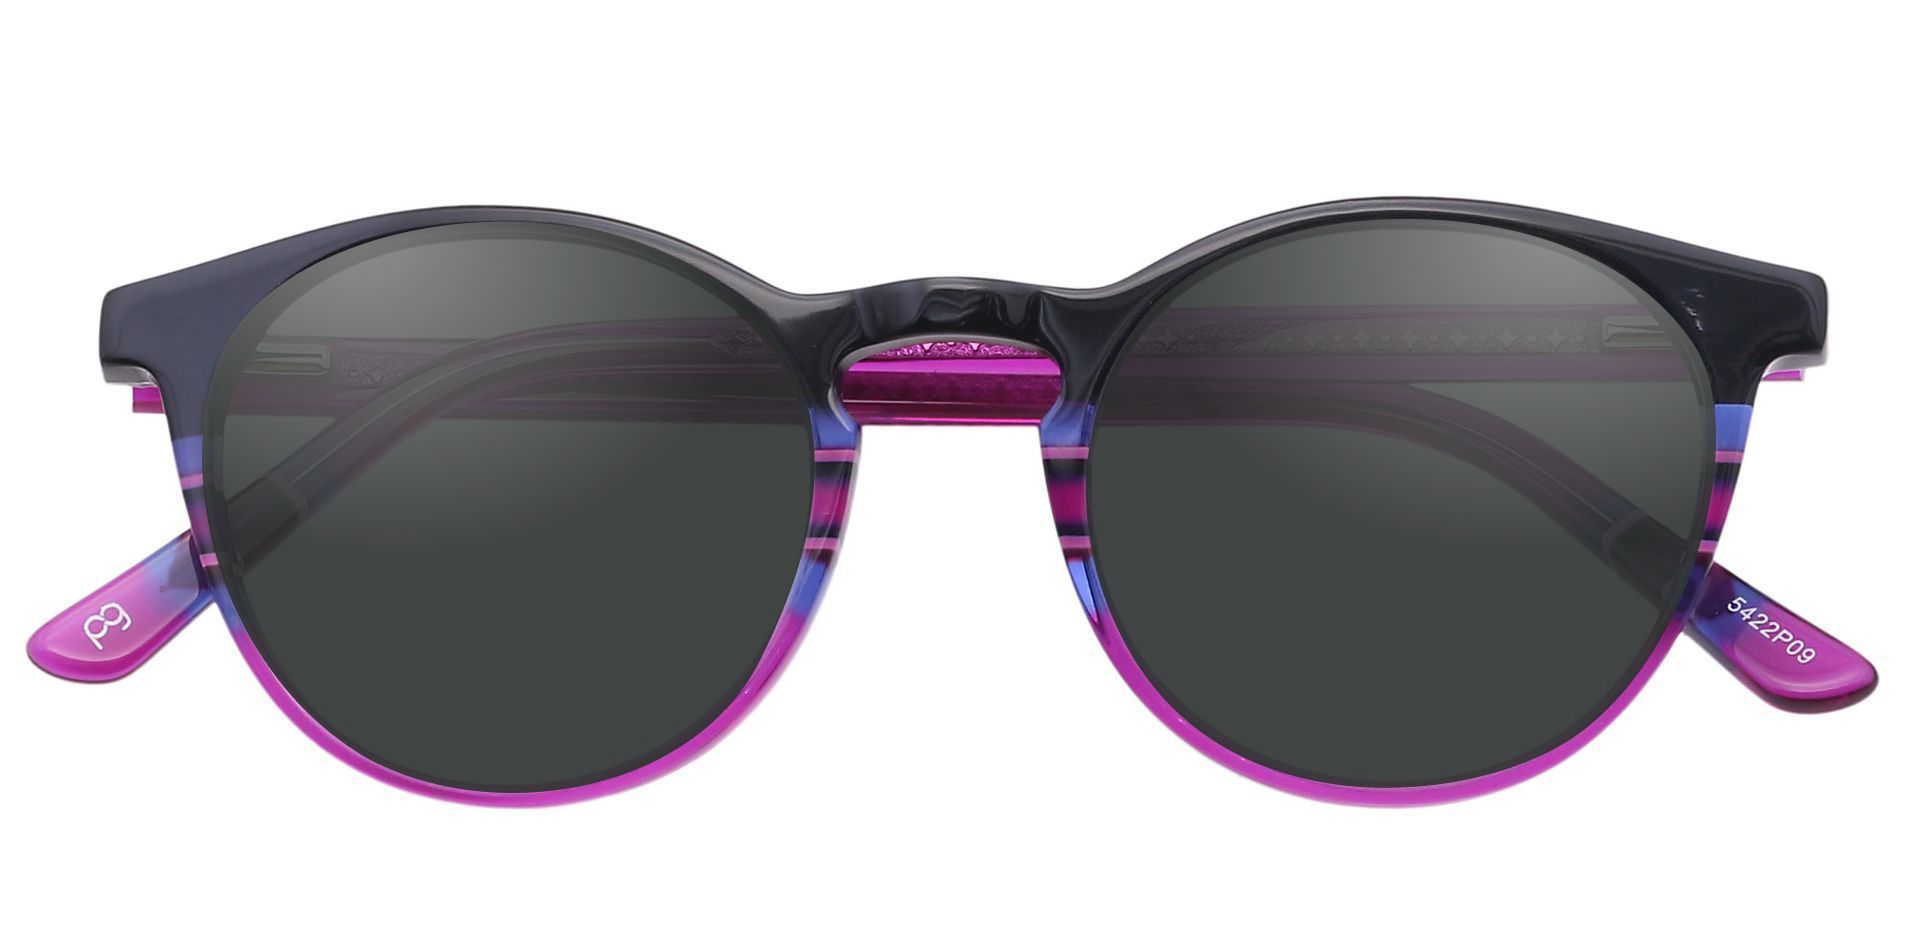 Jellie Round Non-Rx Sunglasses - Purple Frame With Gray Lenses